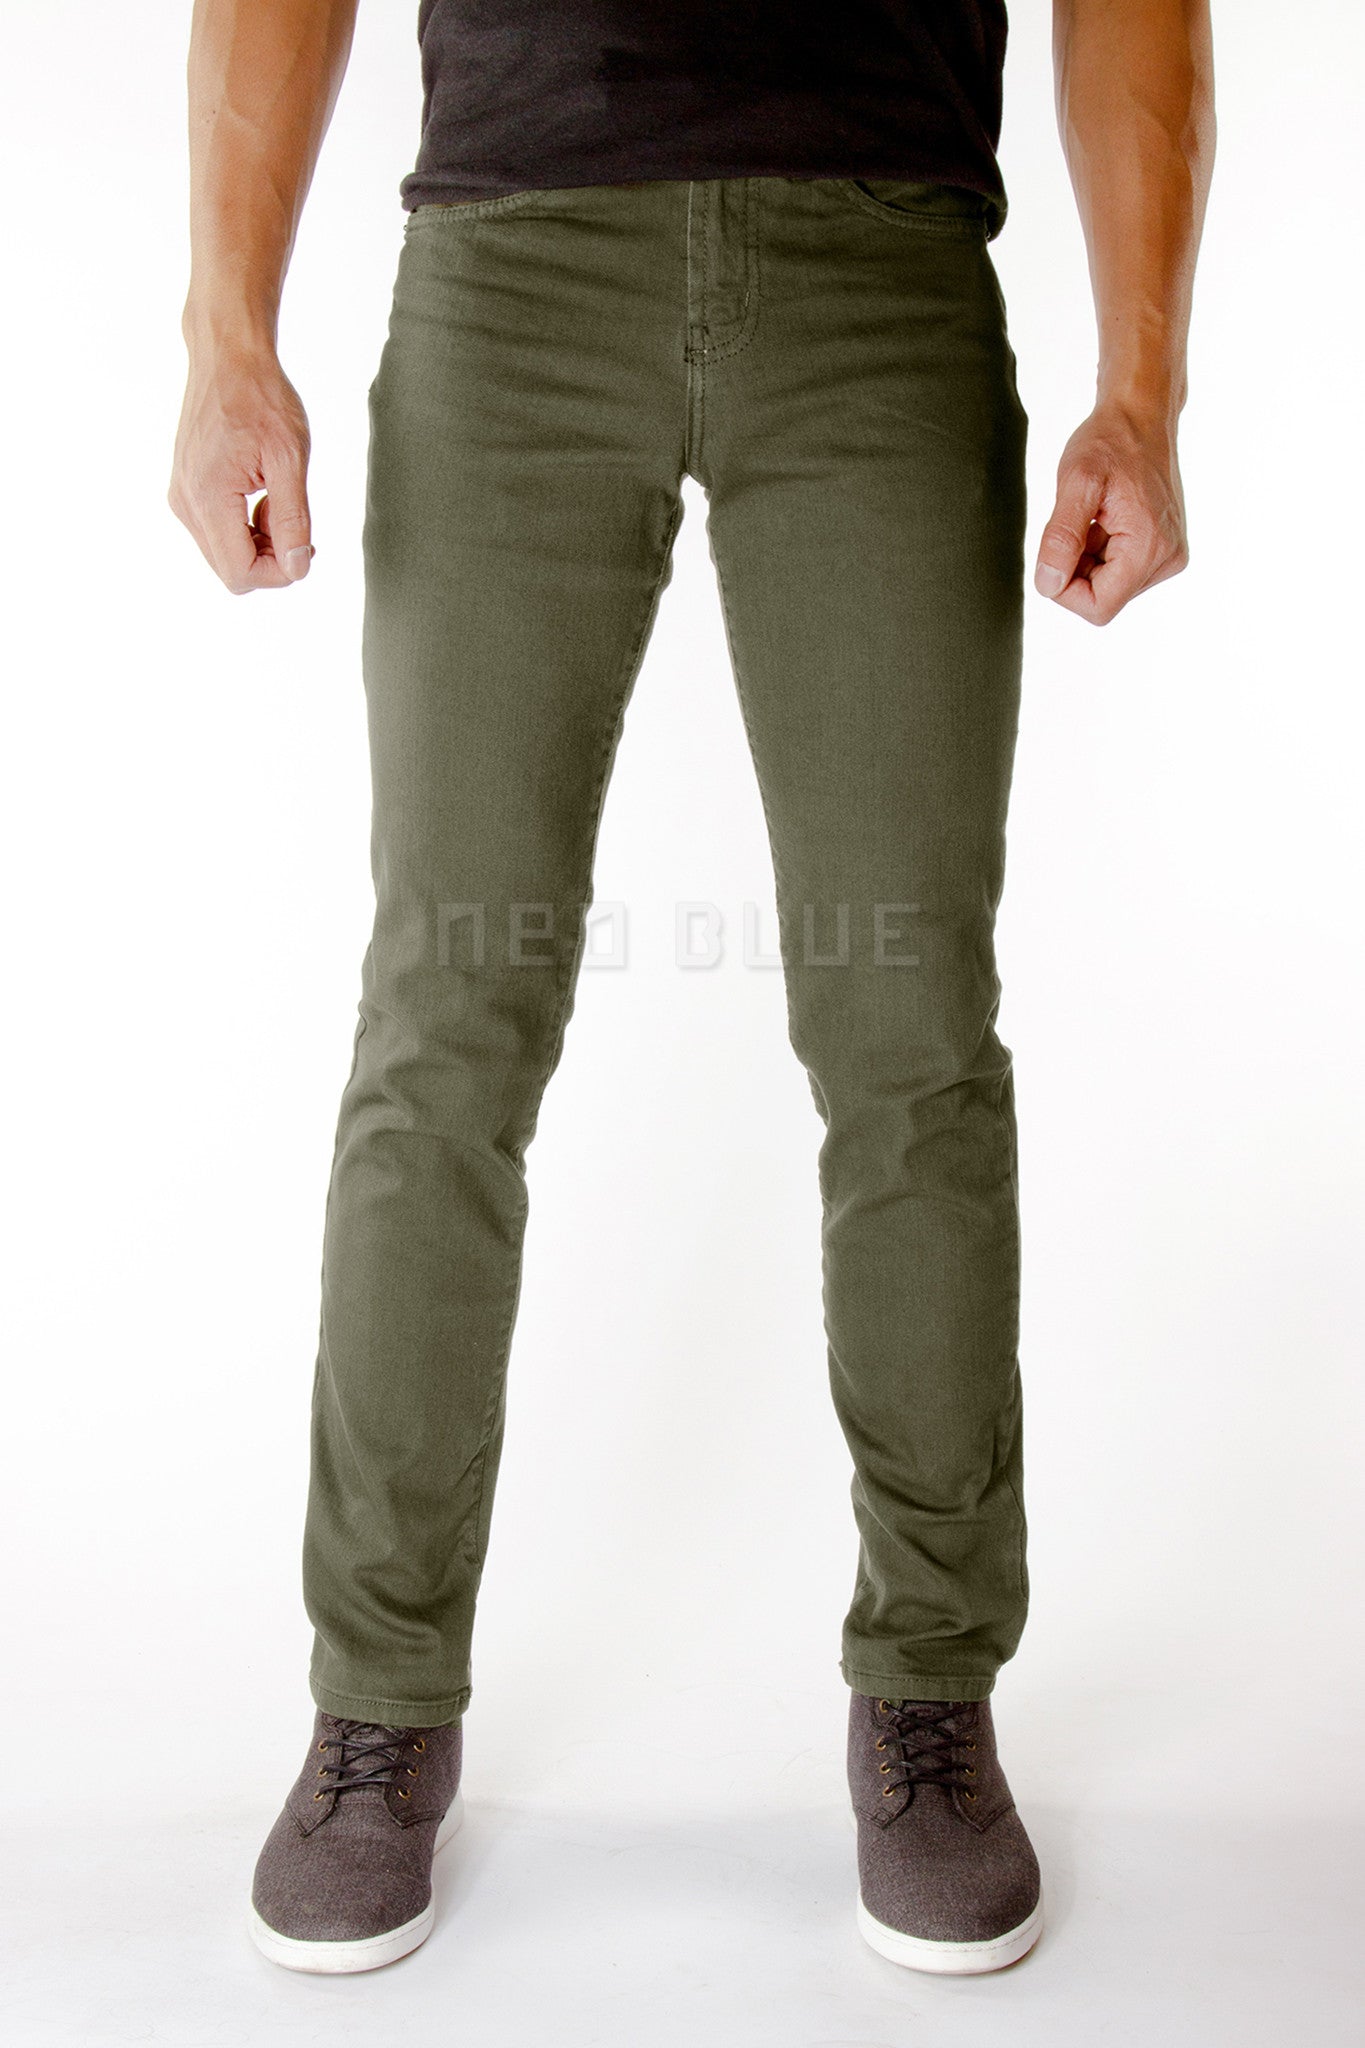 Neo Blue Jeans 224 Army Green (Skinny)